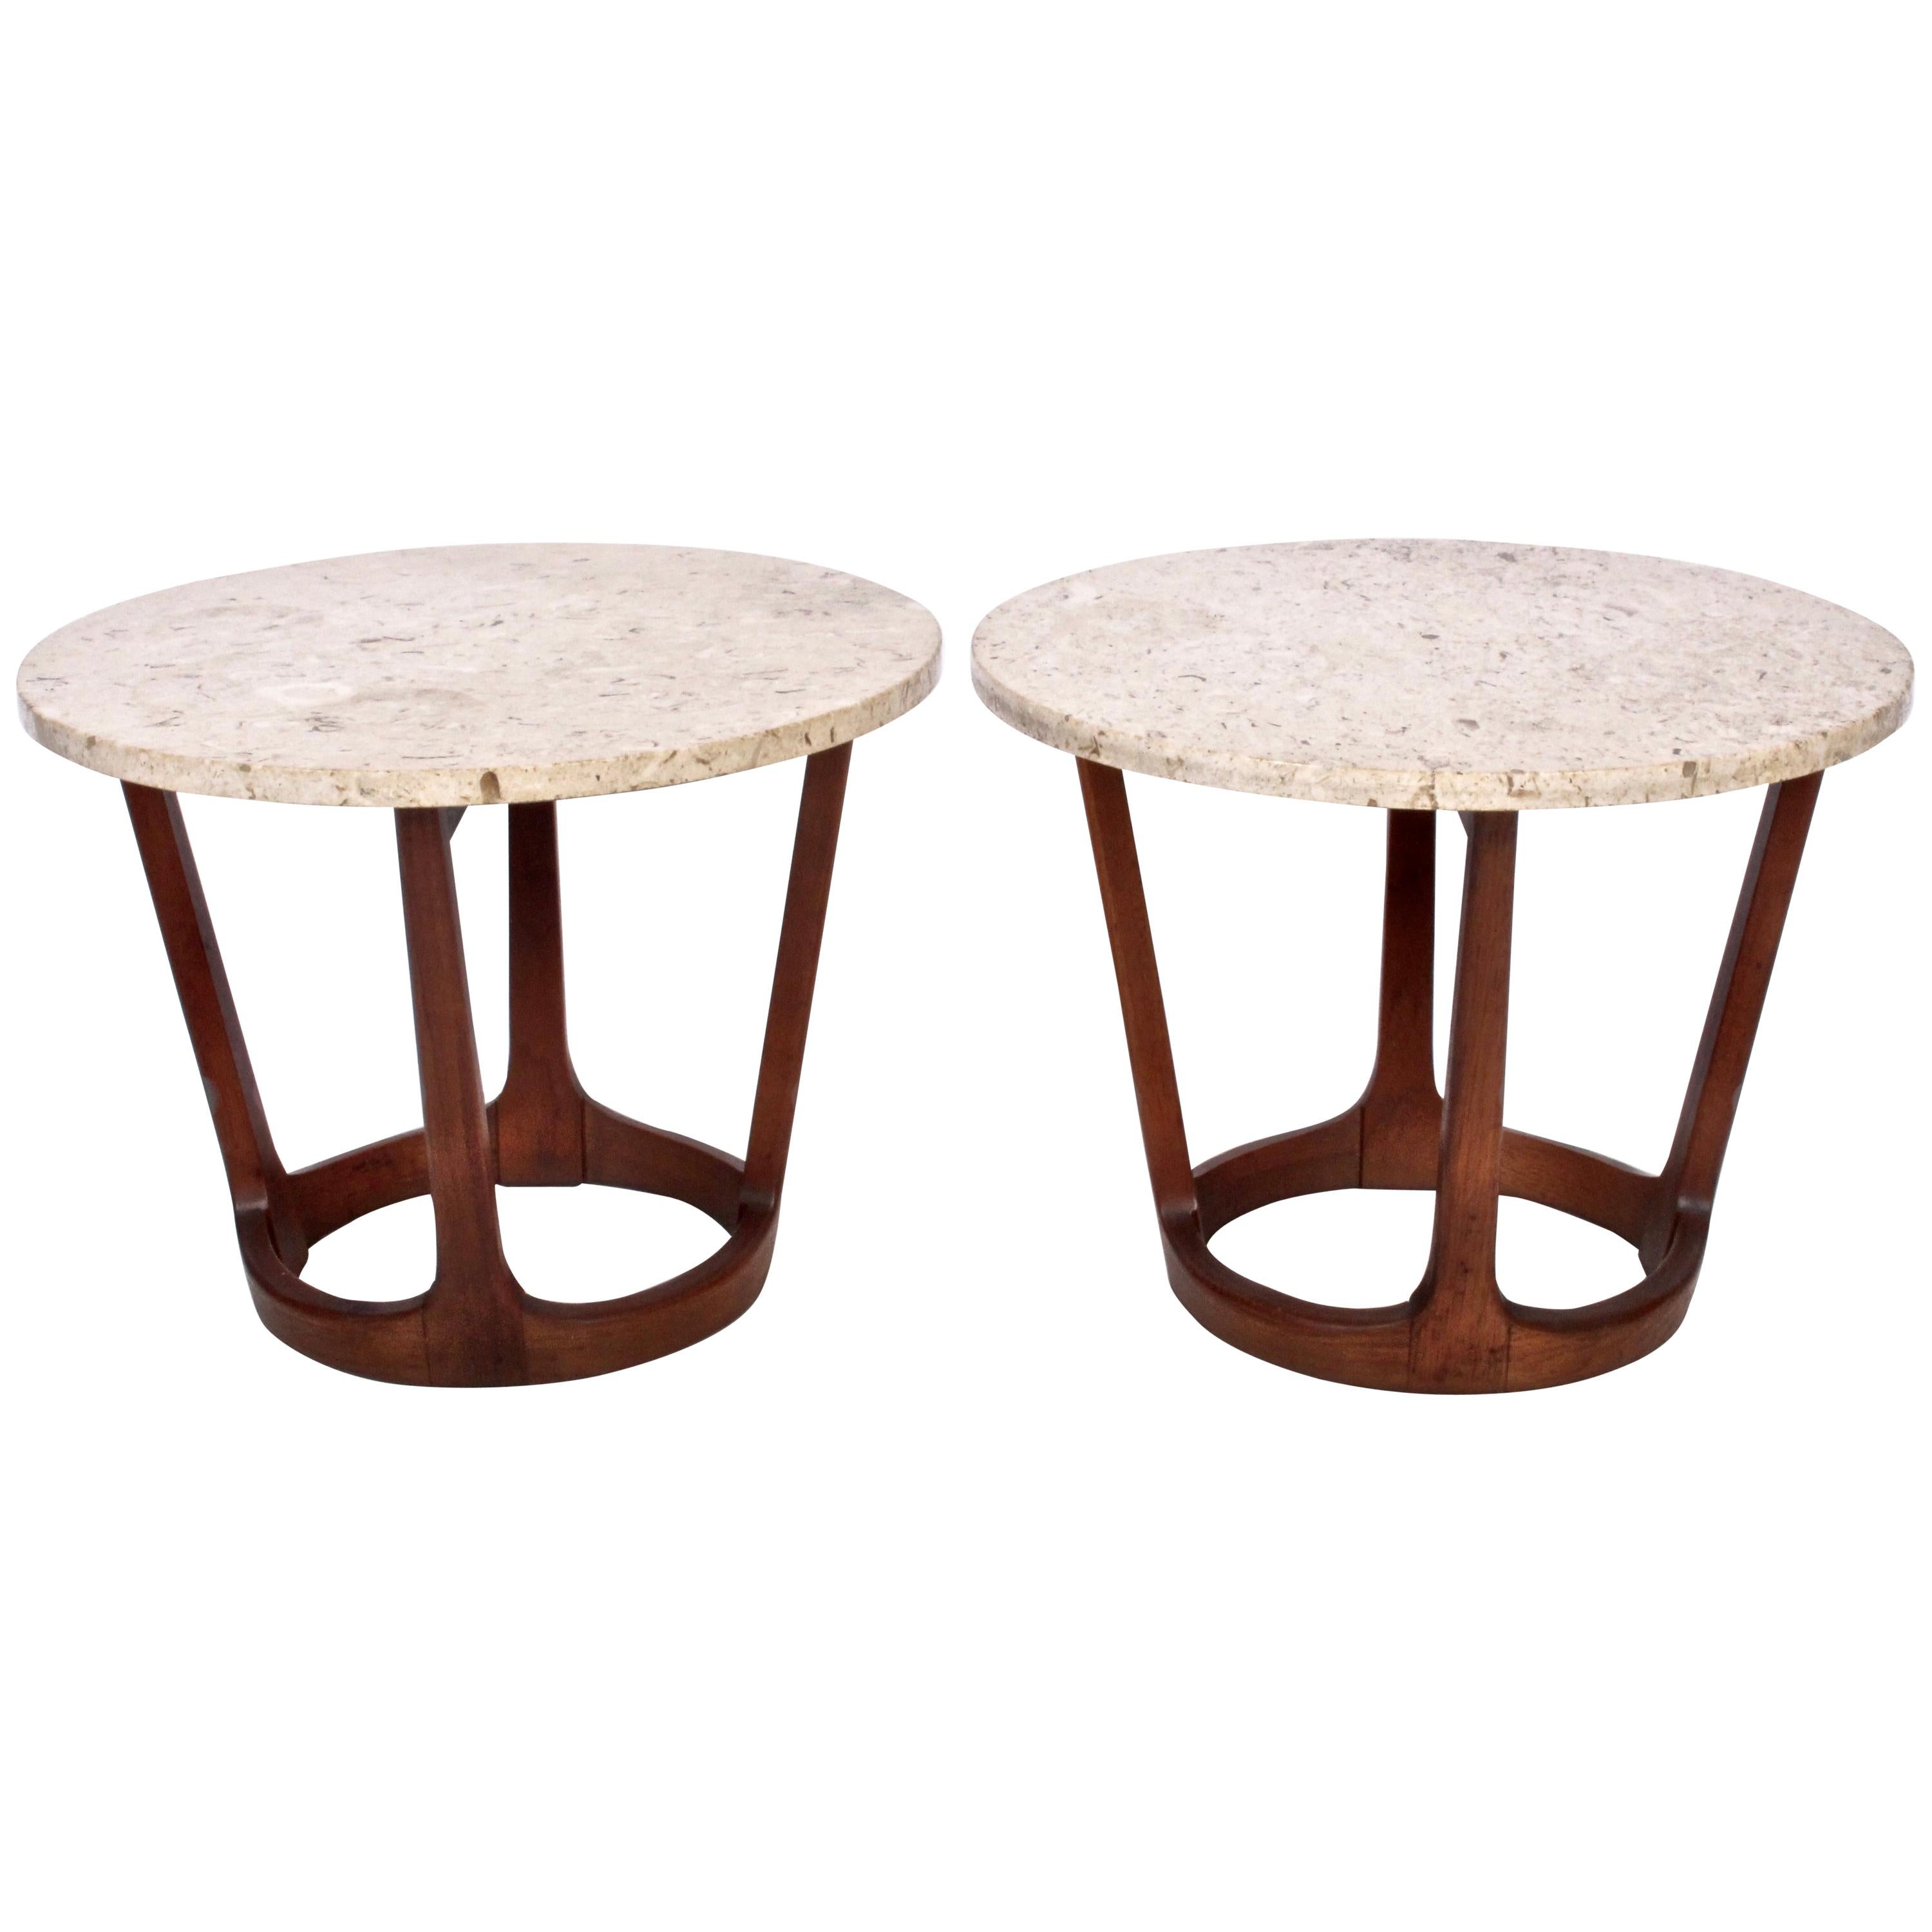 Pair of Lane American Mid-Century Modern Walnut and Round Travertine End Tables